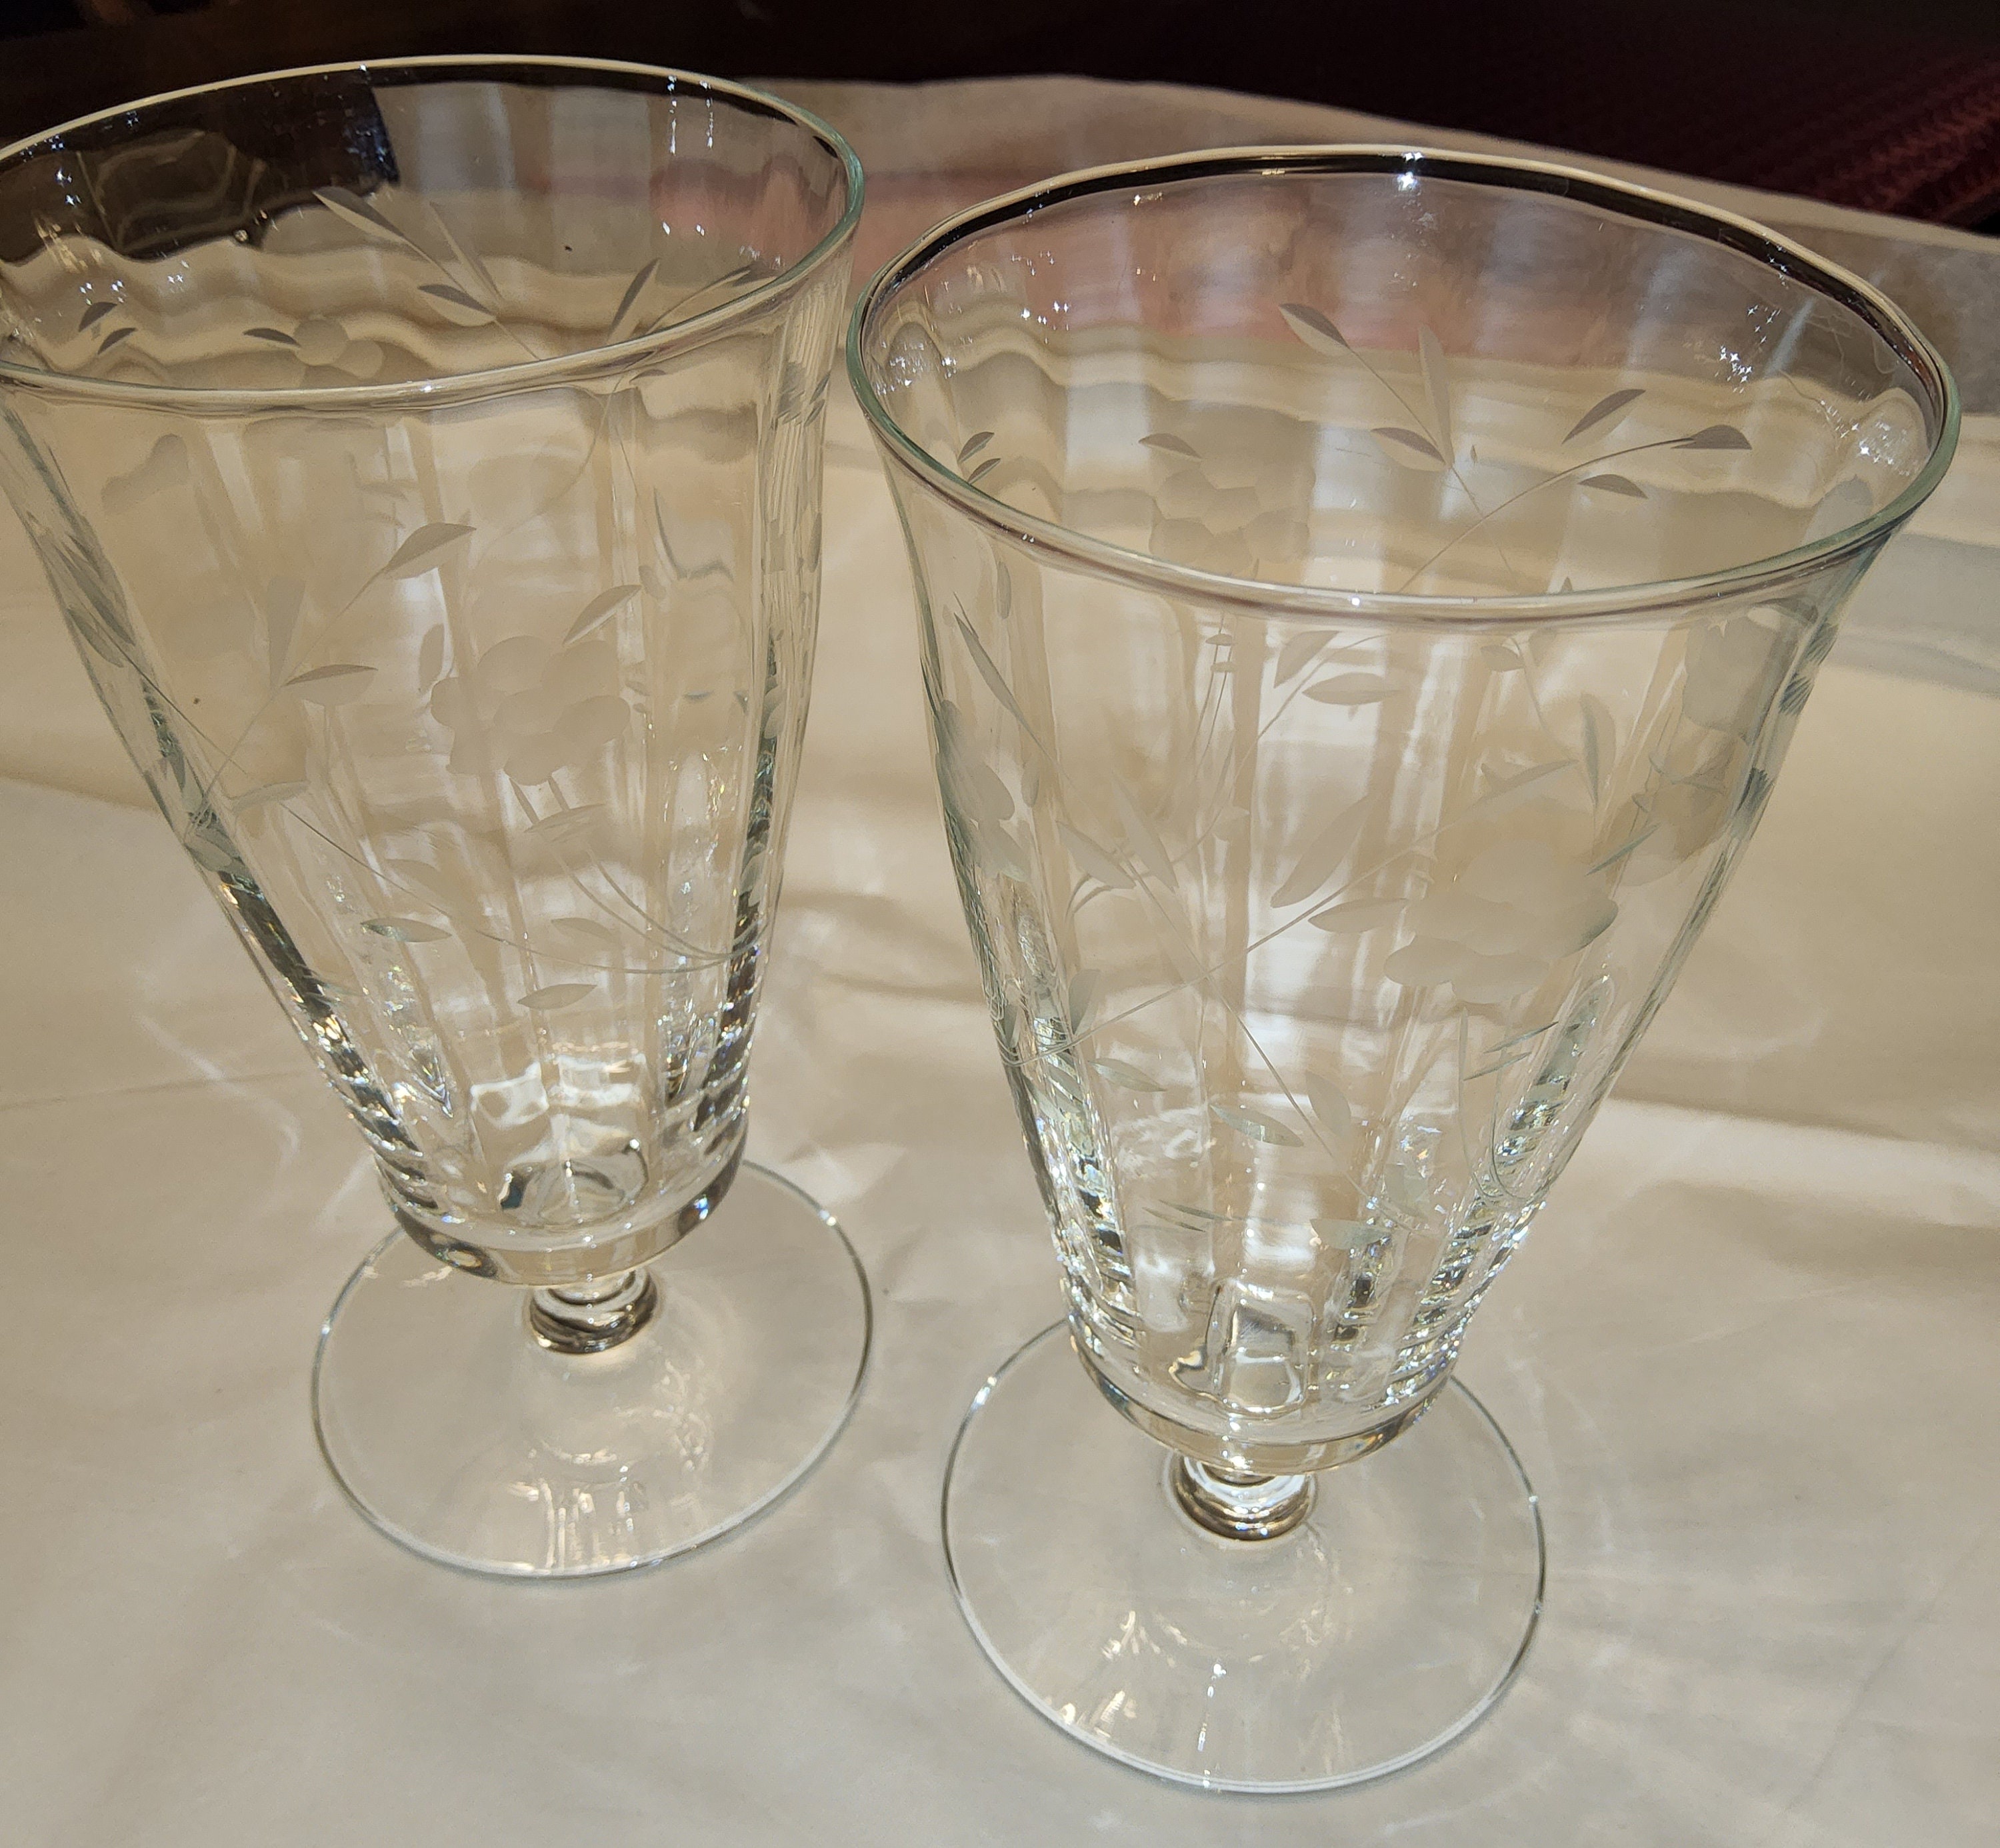 Set of 4, Etched Grapes Cluster Iced Tea Glasses, 16 Ounces. –